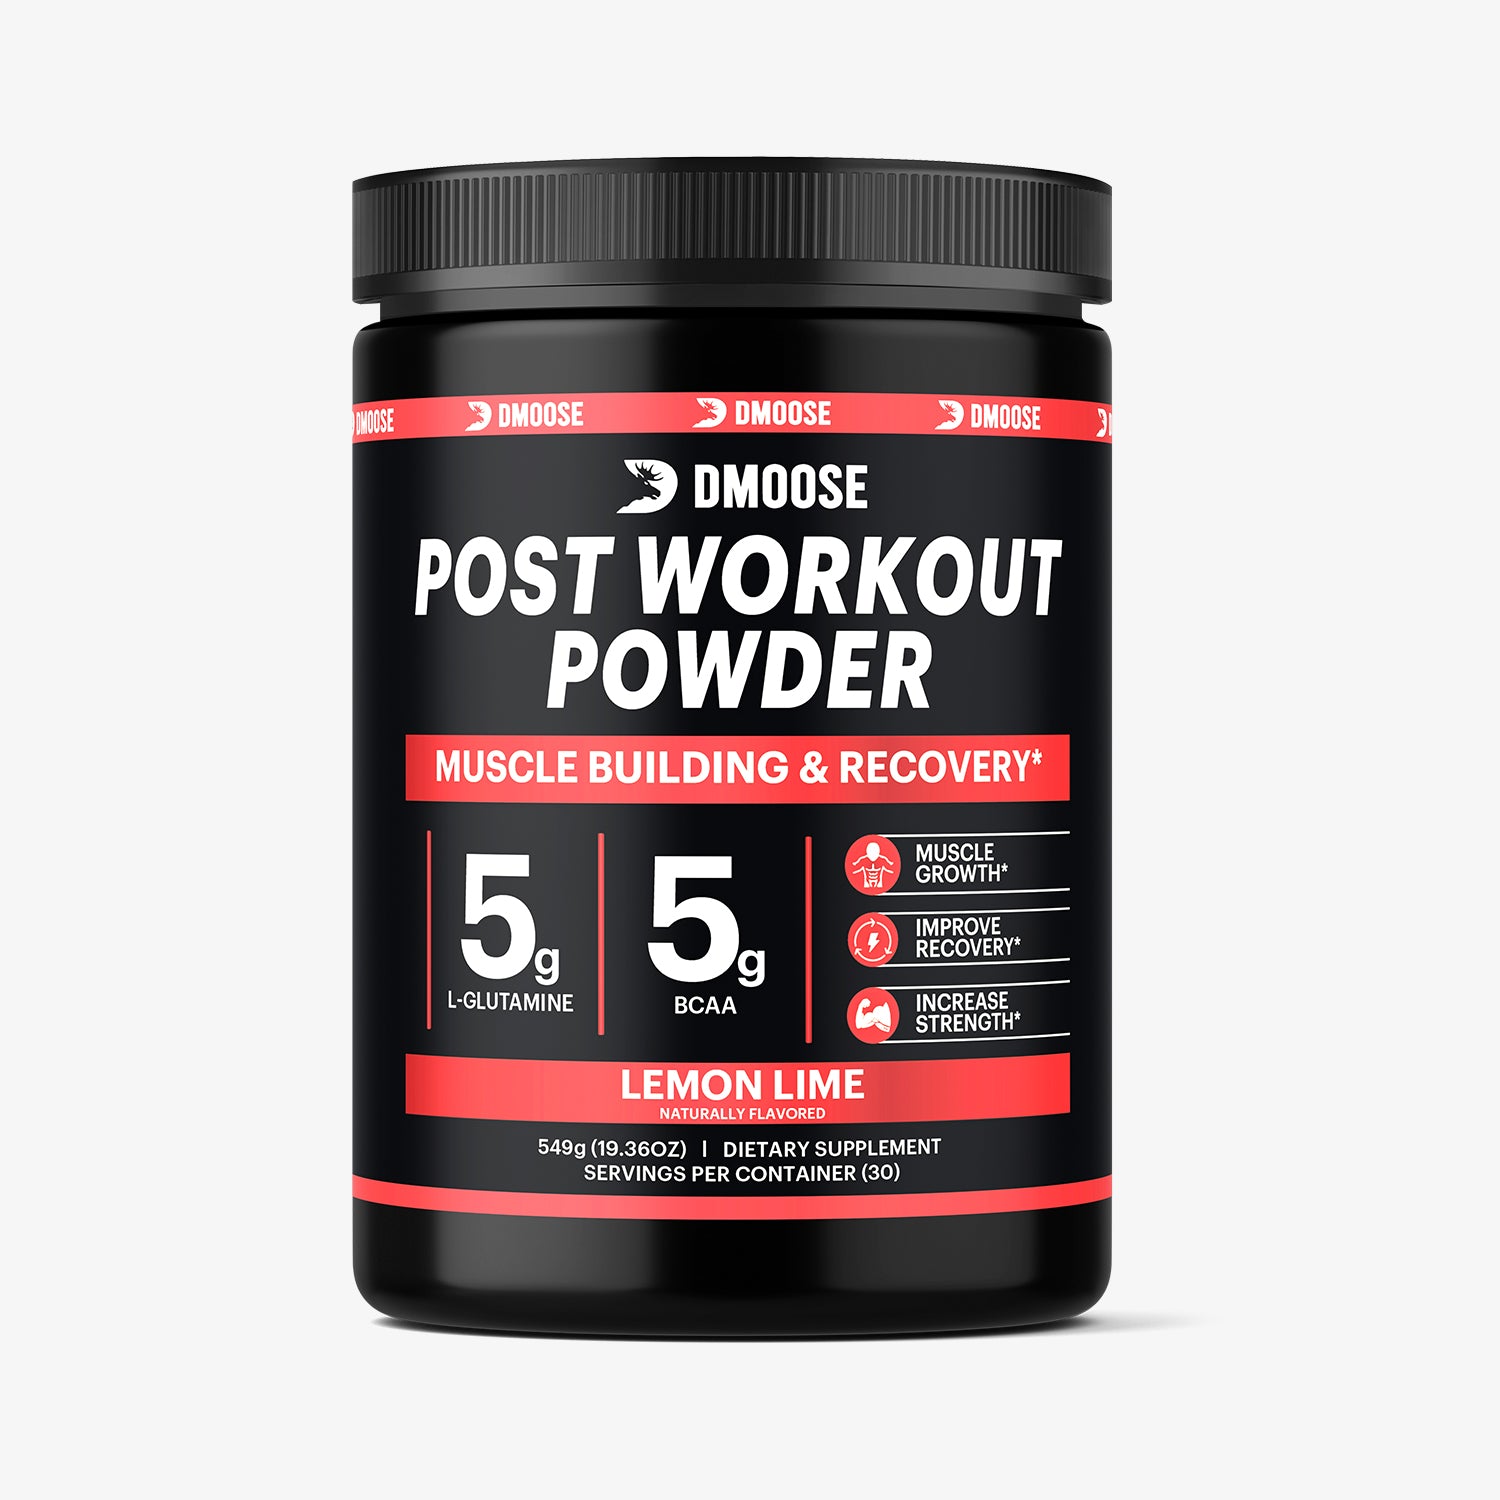 Post-workout muscle repair supplements